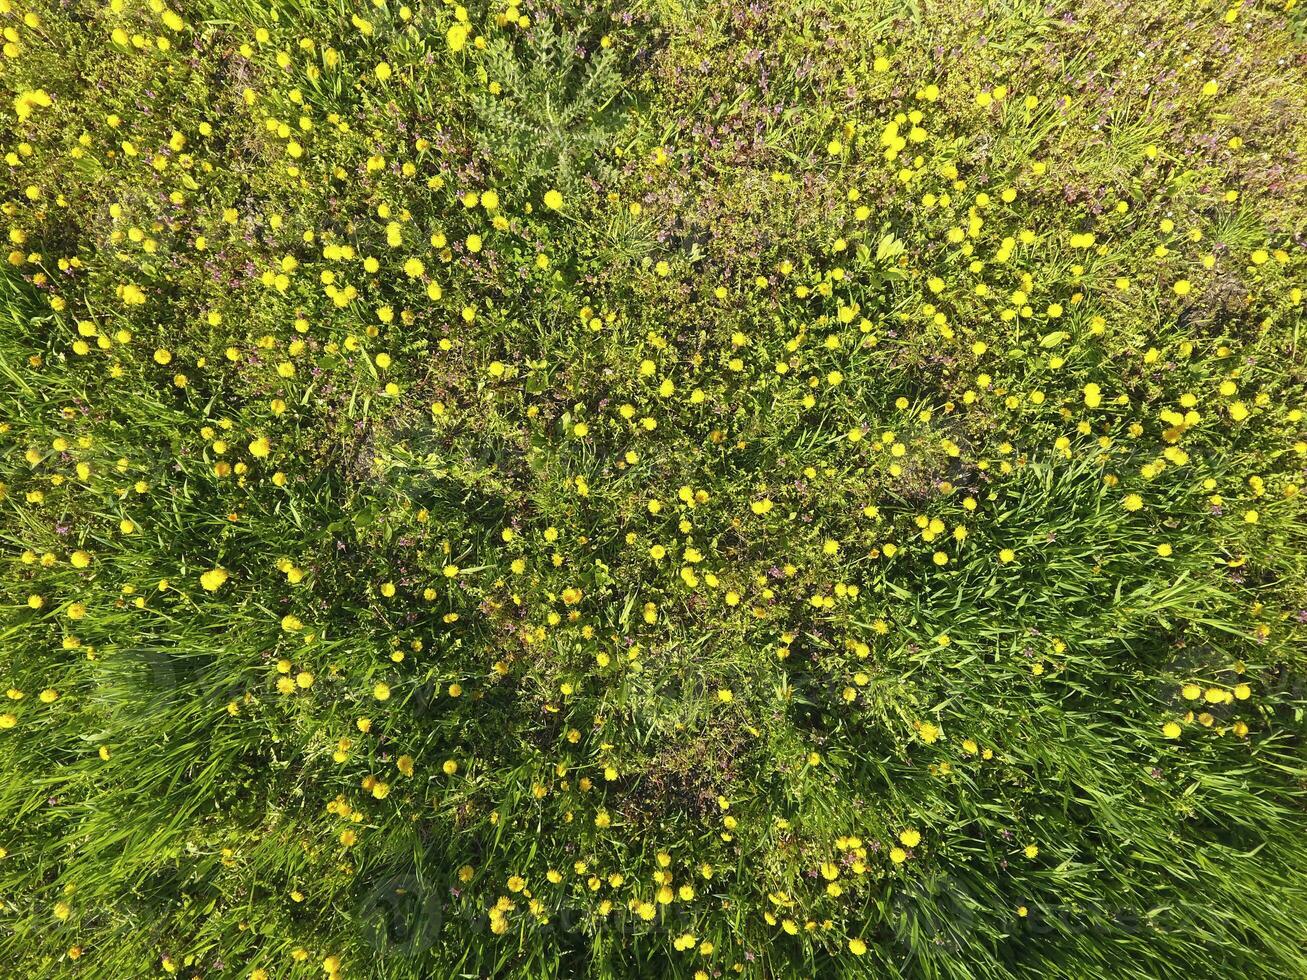 Top view of a flower clearing in the garden. Dandelions are yellow flowers and other flowers photo